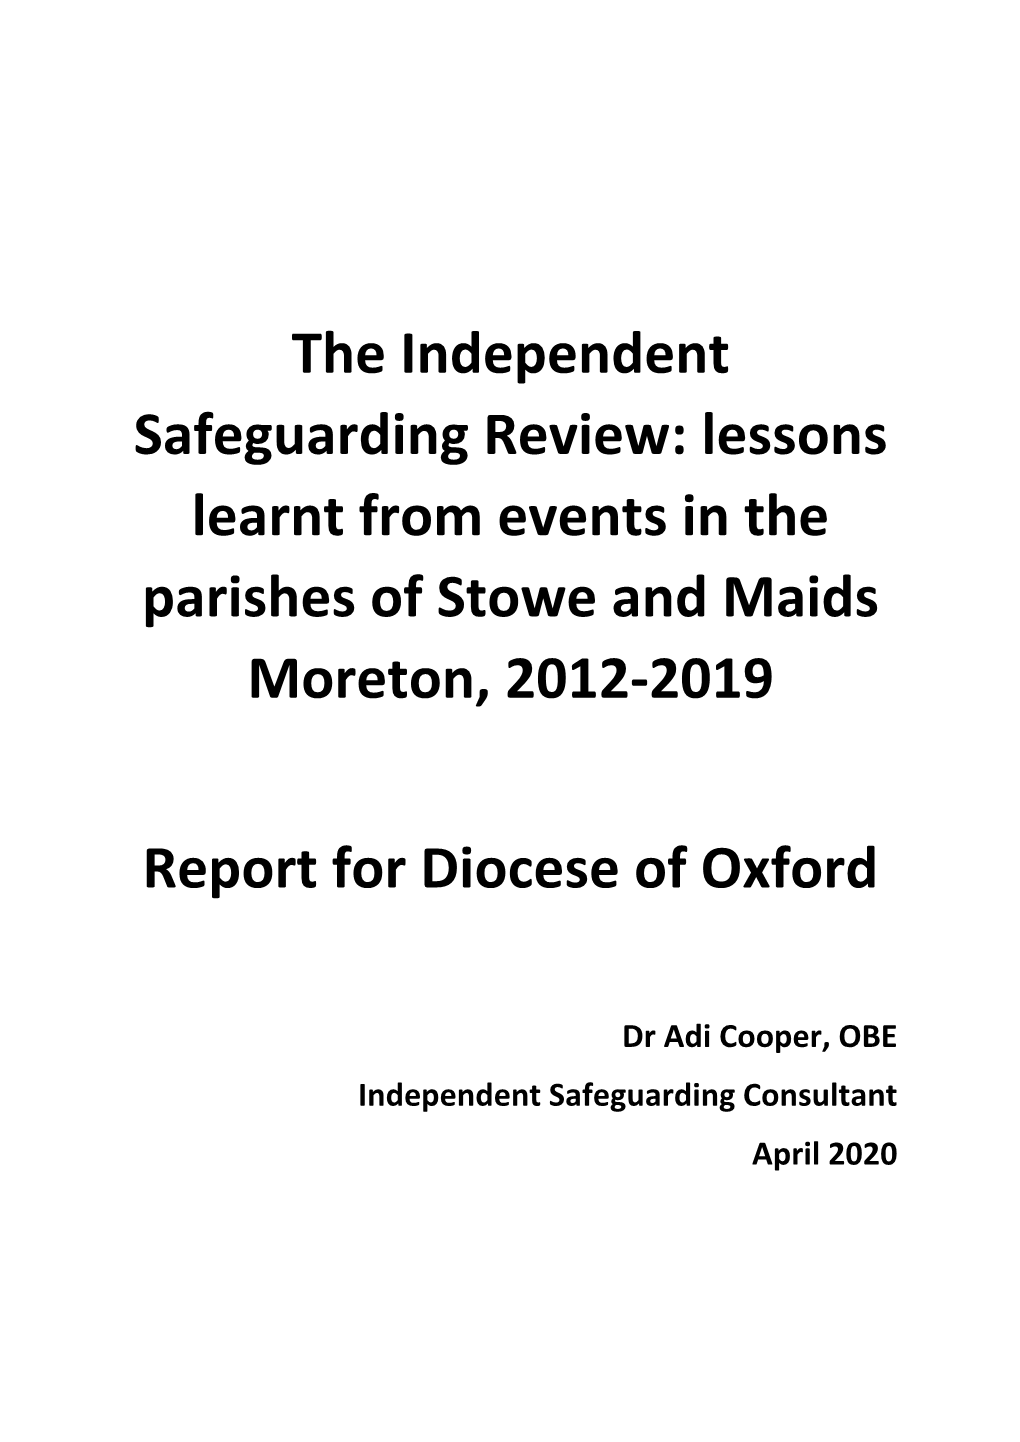 The Independent Safeguarding Review: Lessons Learnt from Events in the Parishes of Stowe and Maids Moreton, 2012-2019